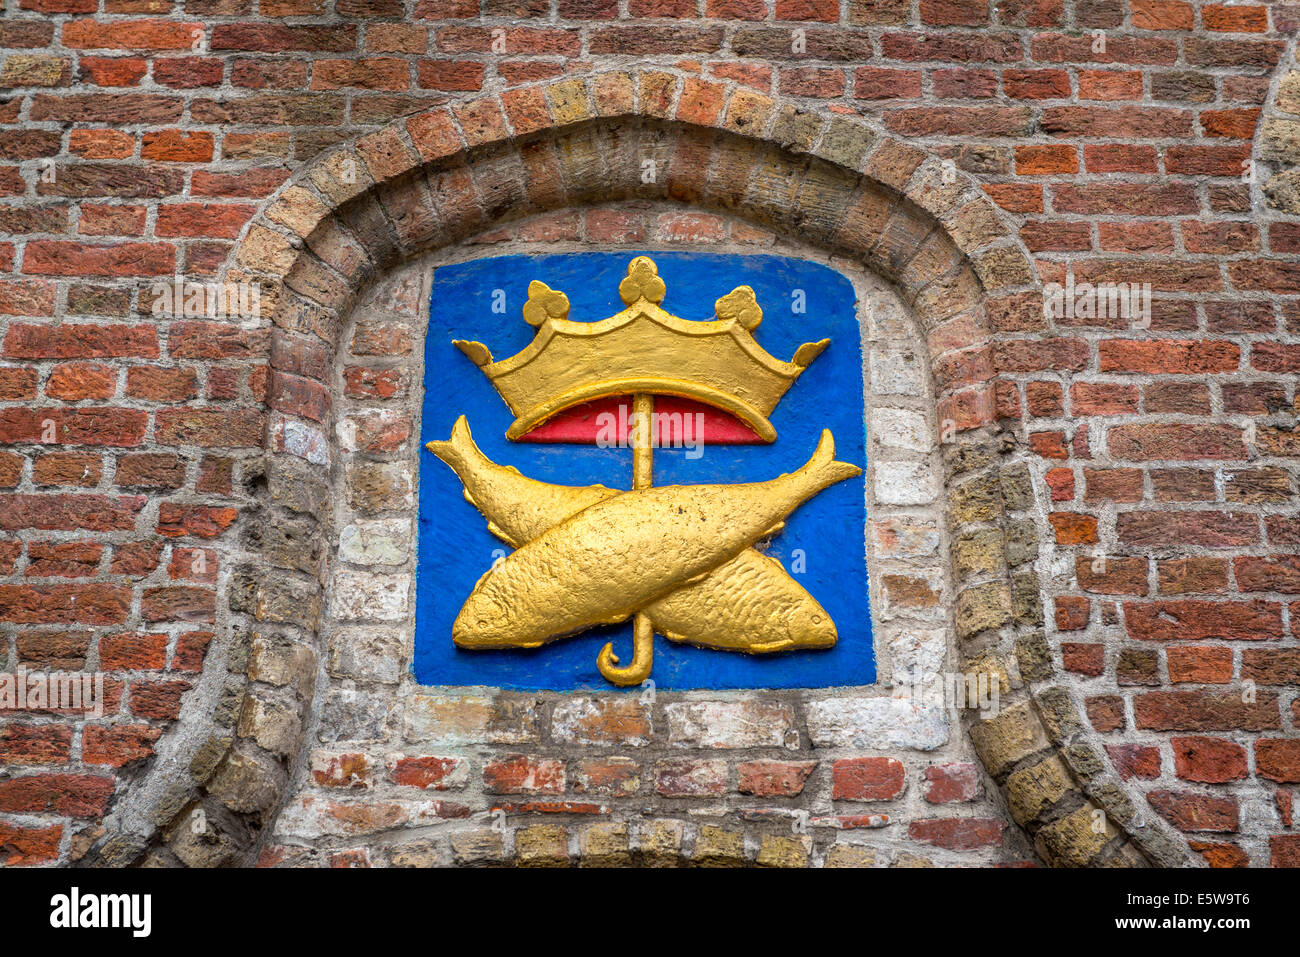 Coat of arms, Fishmongers corporation house, Bruges Stock Photo